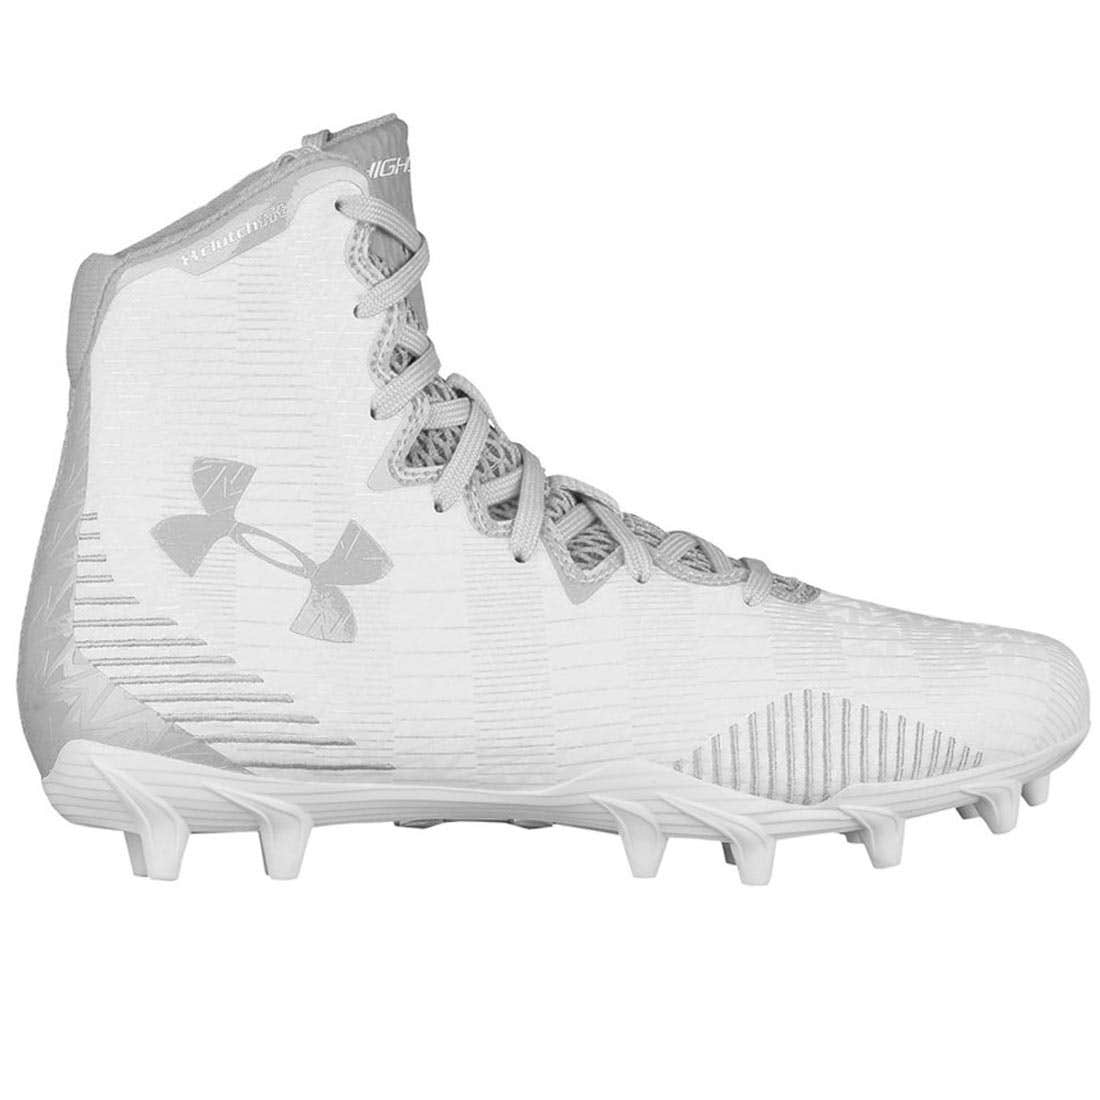 Under Armour Highlight MC Womens Lacrosse Cleats | Lacrosse Unlimited